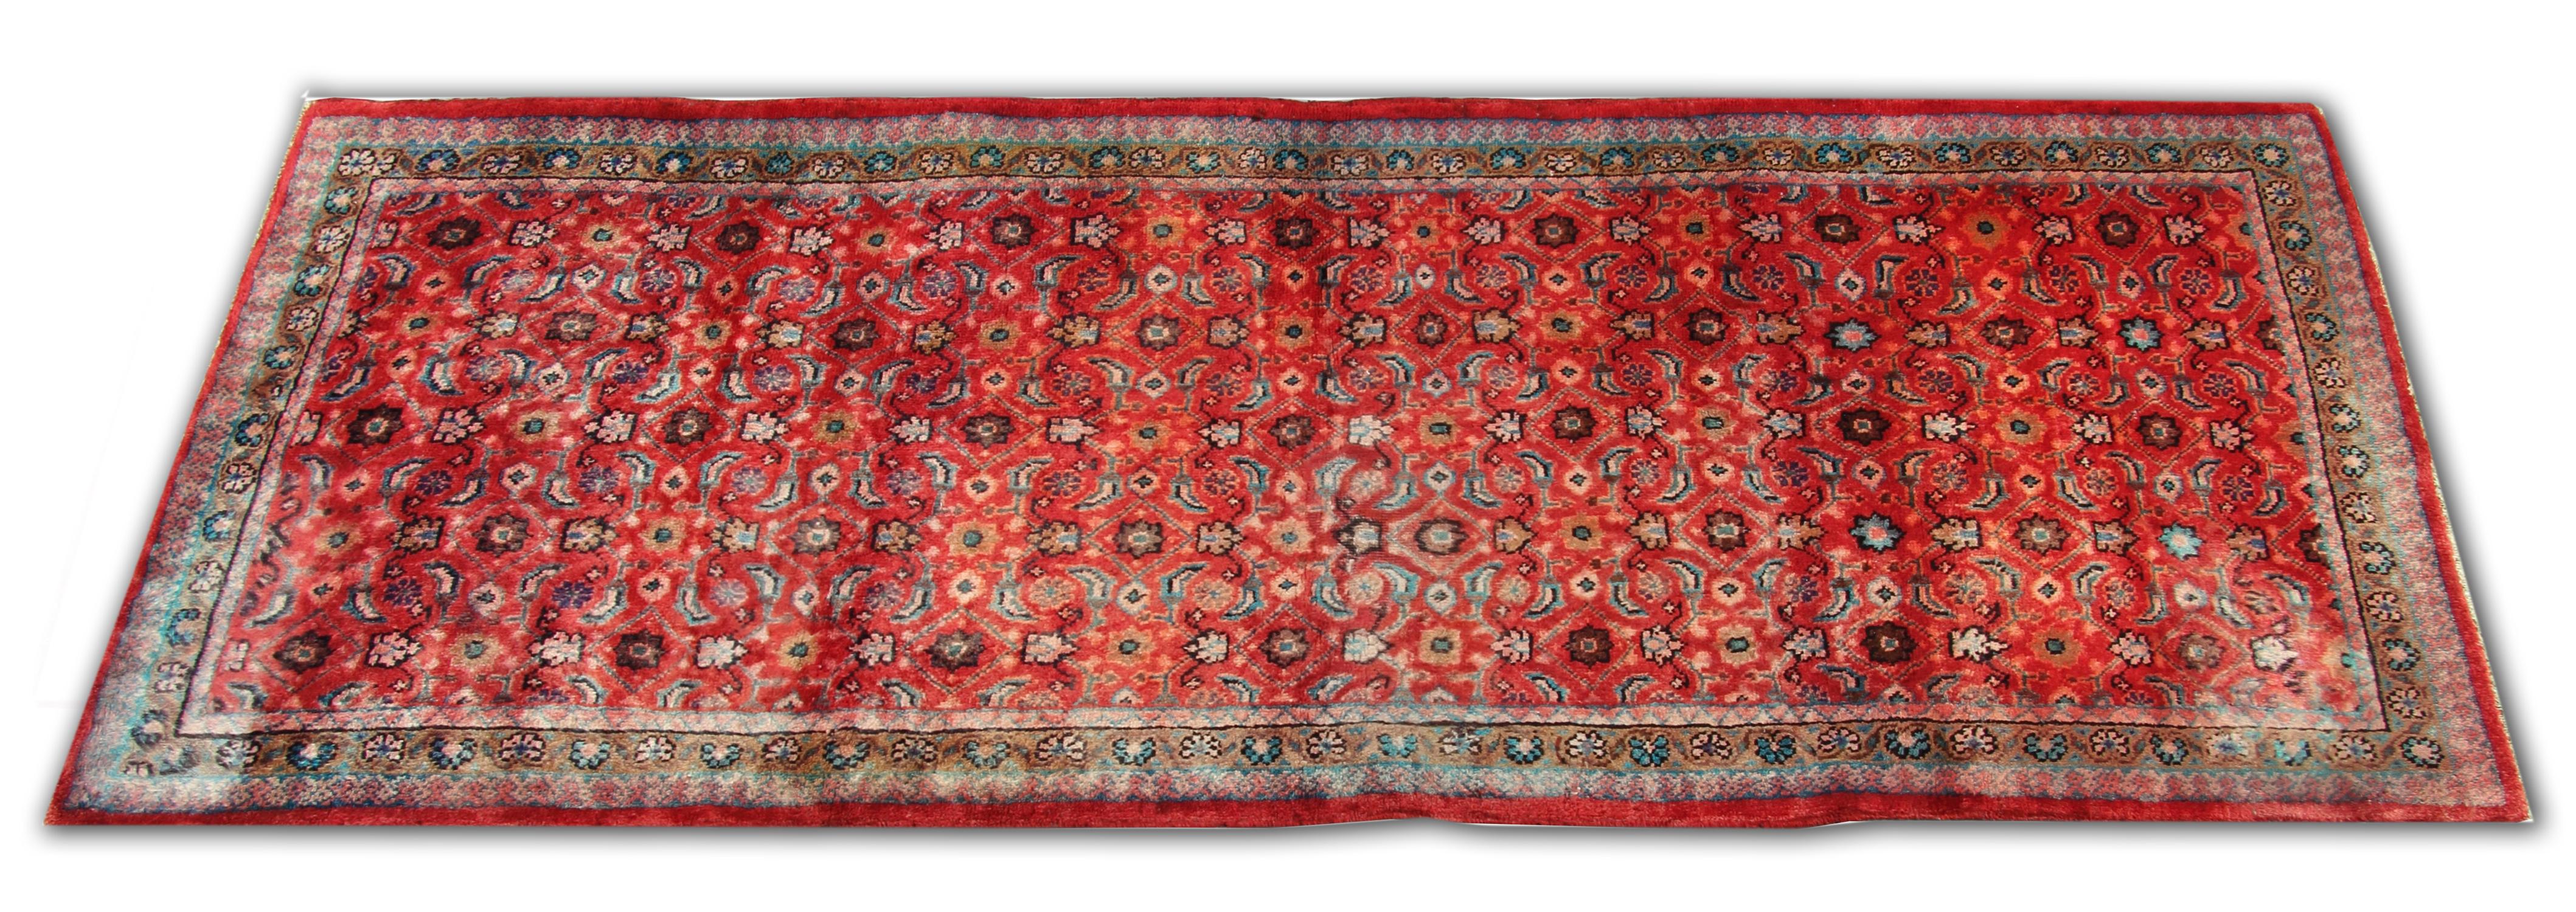 This fine red wool runner rug is a traditional vintage carpet woven by hand in the late 20th century. The design features a repeating pattern and a layered border that encloses the design. Woven in accents of blue, brown and ivory on a rich red